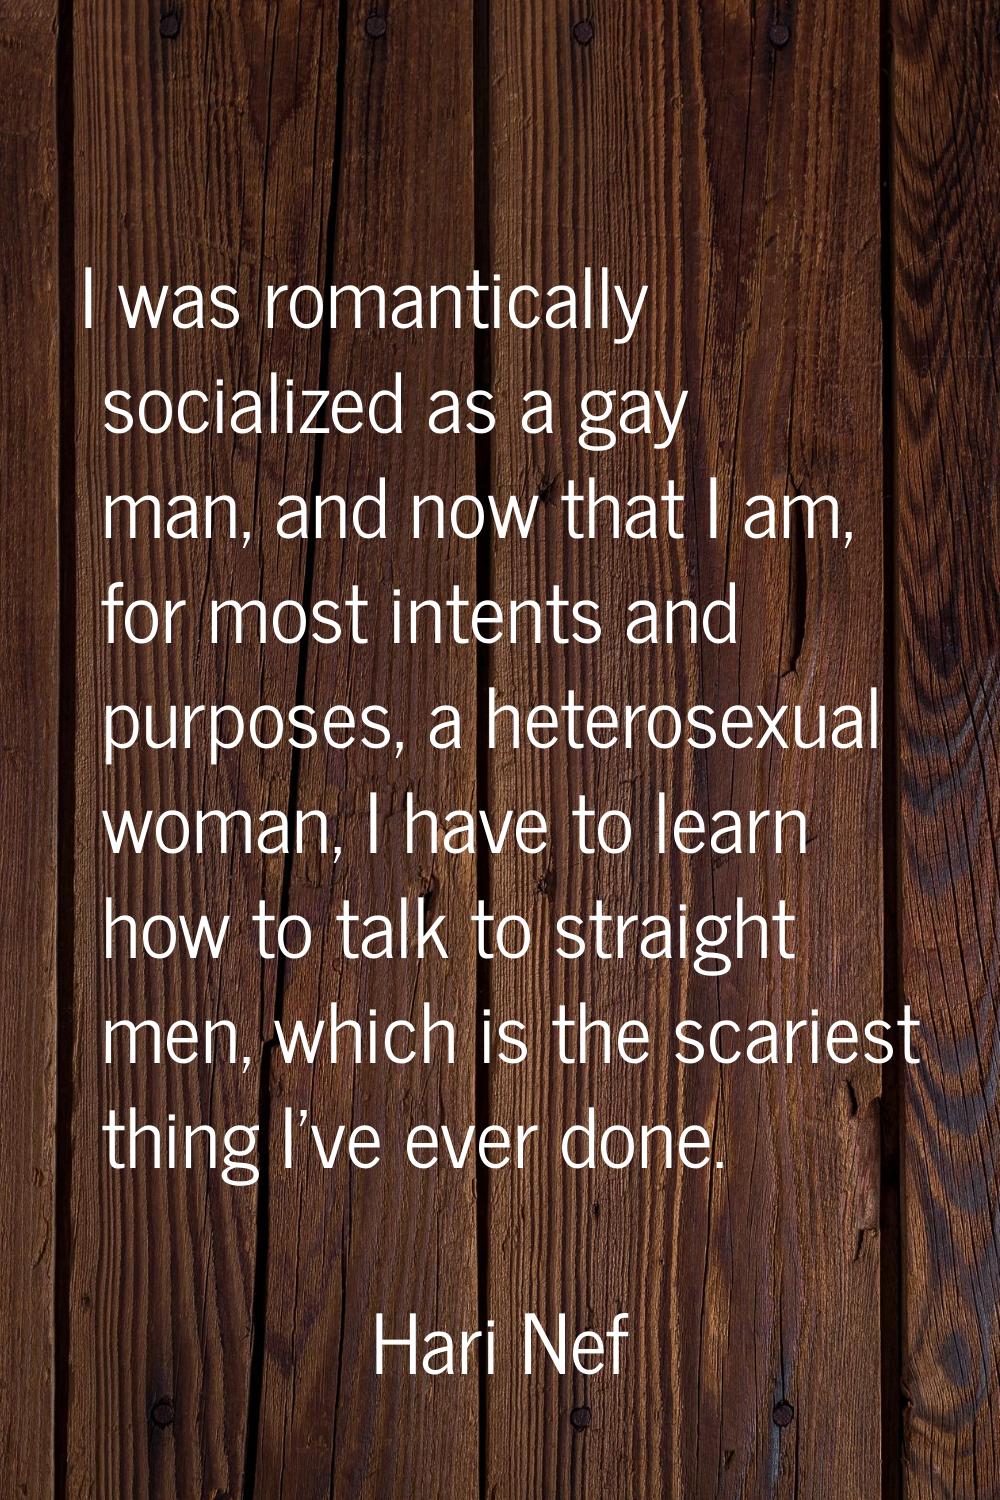 I was romantically socialized as a gay man, and now that I am, for most intents and purposes, a het